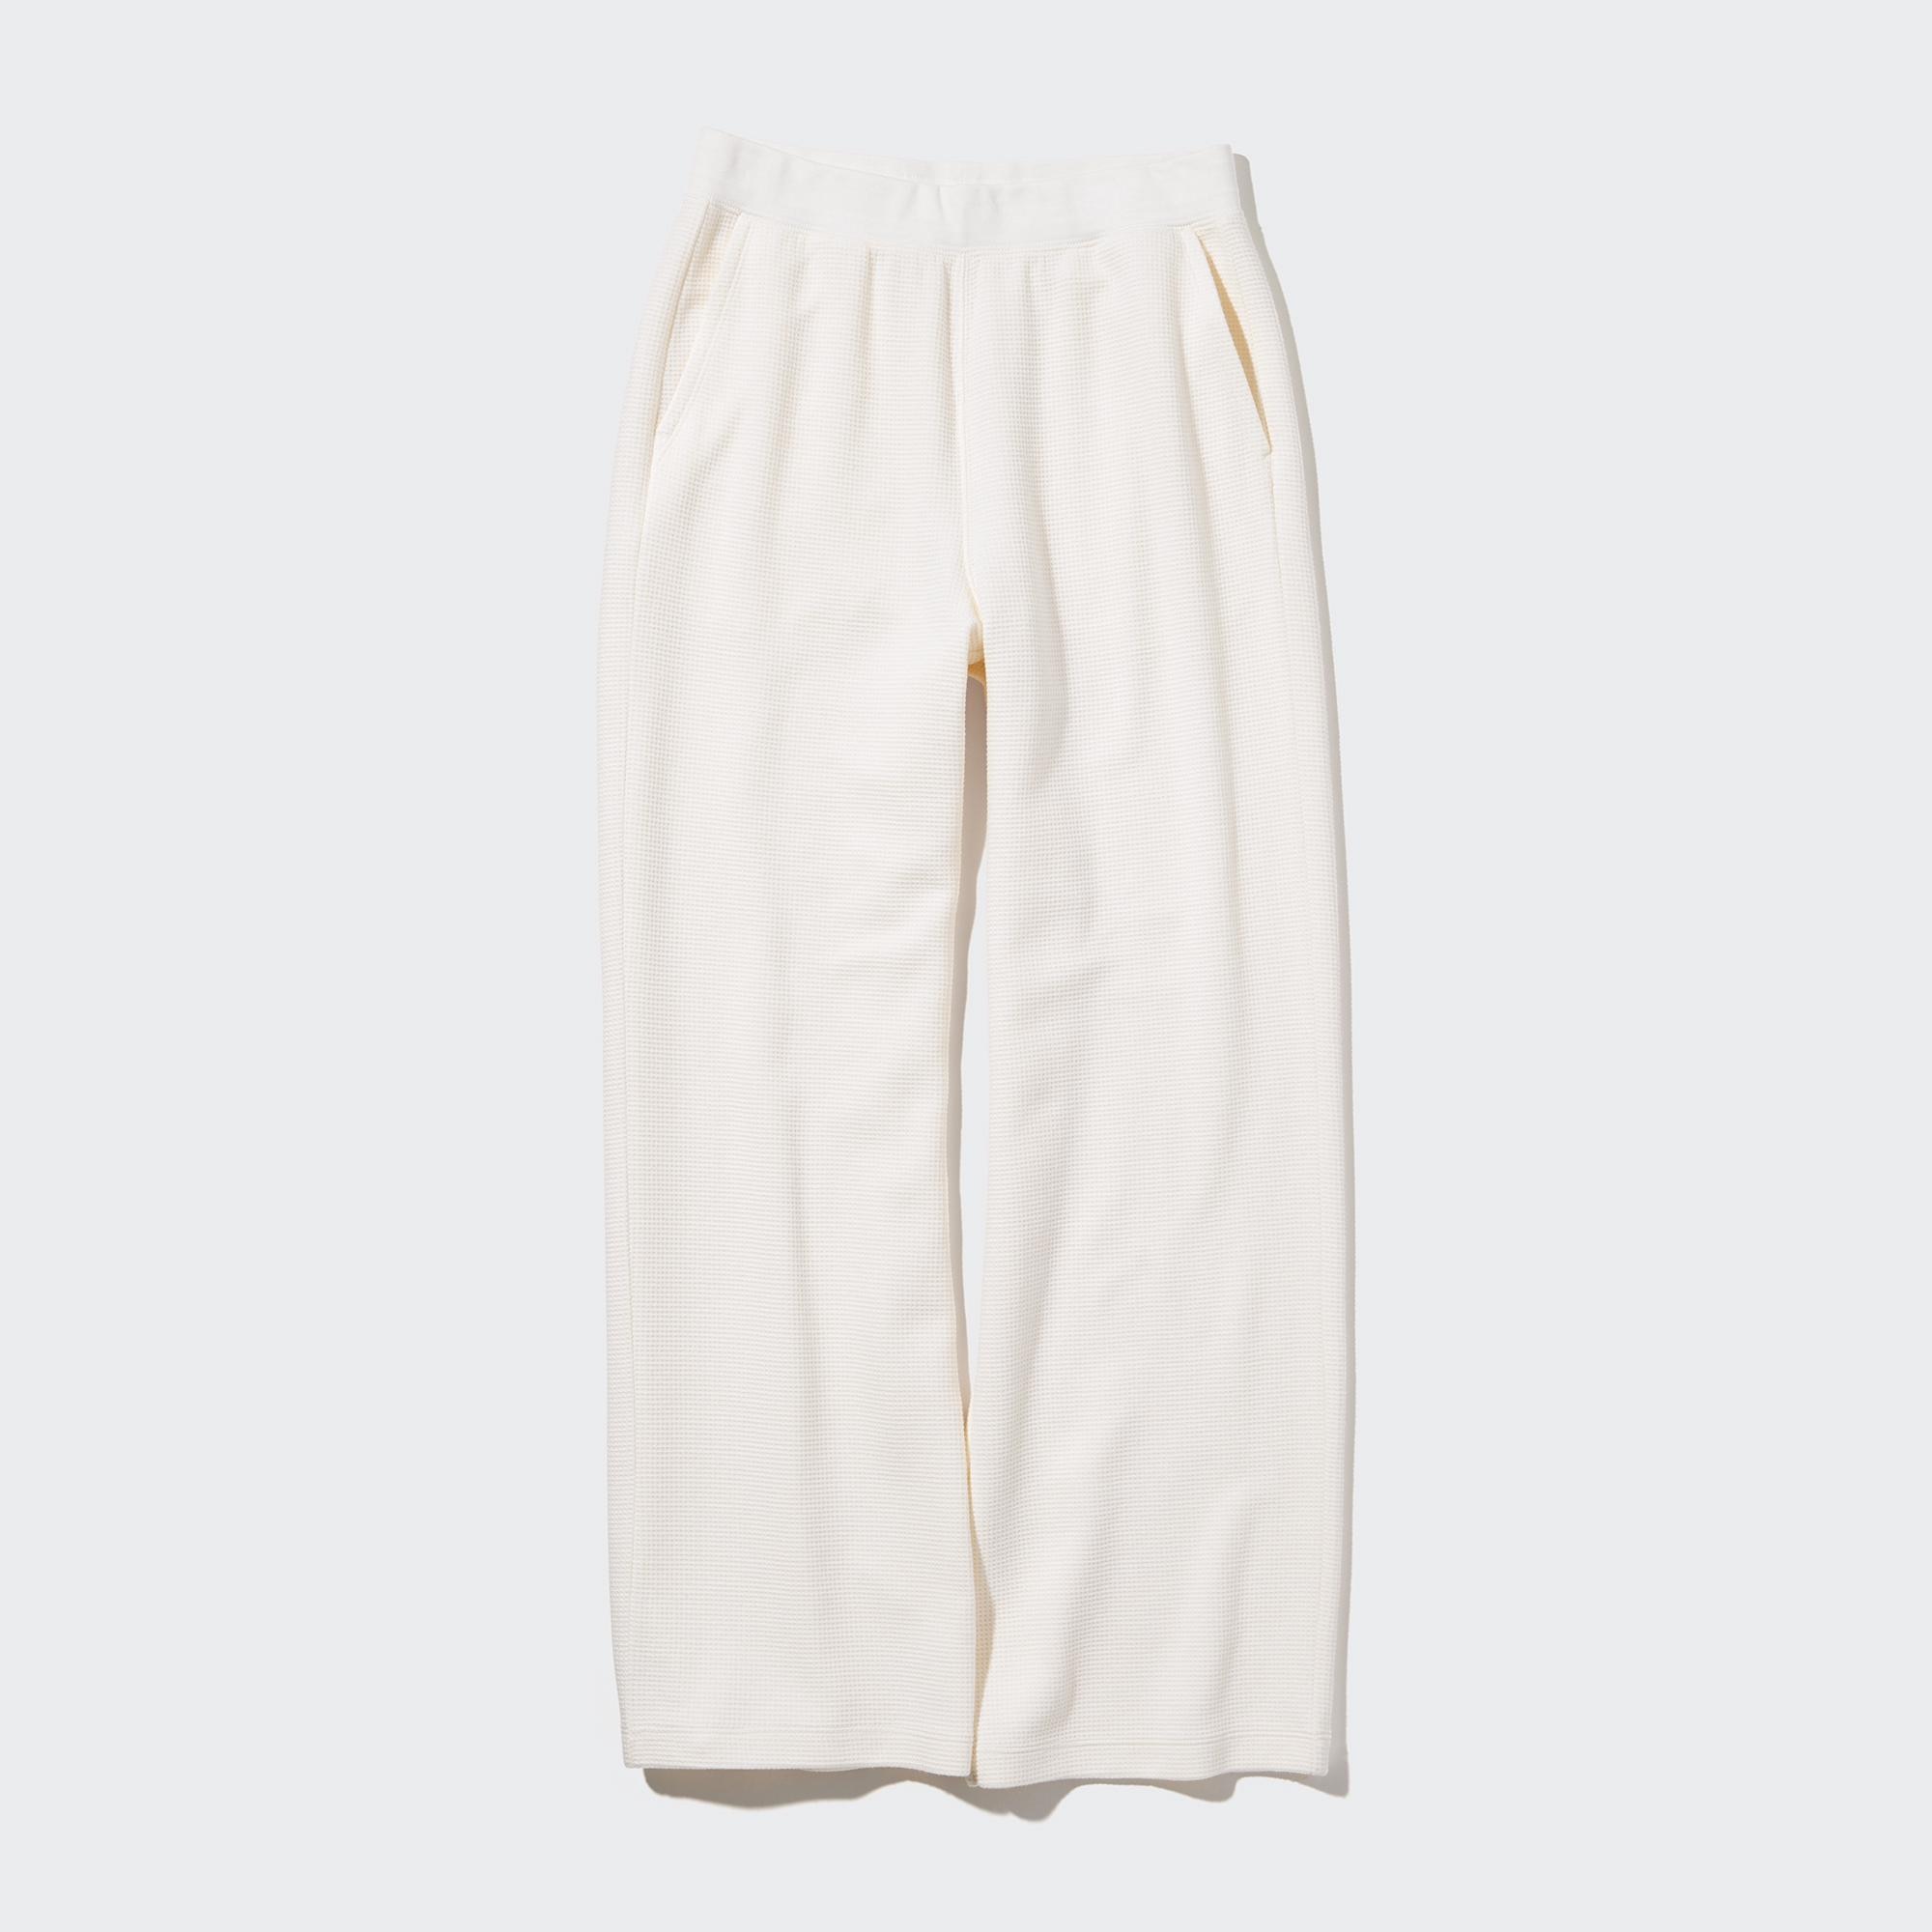 Buy White Trousers & Pants for Women by W Online | Ajio.com